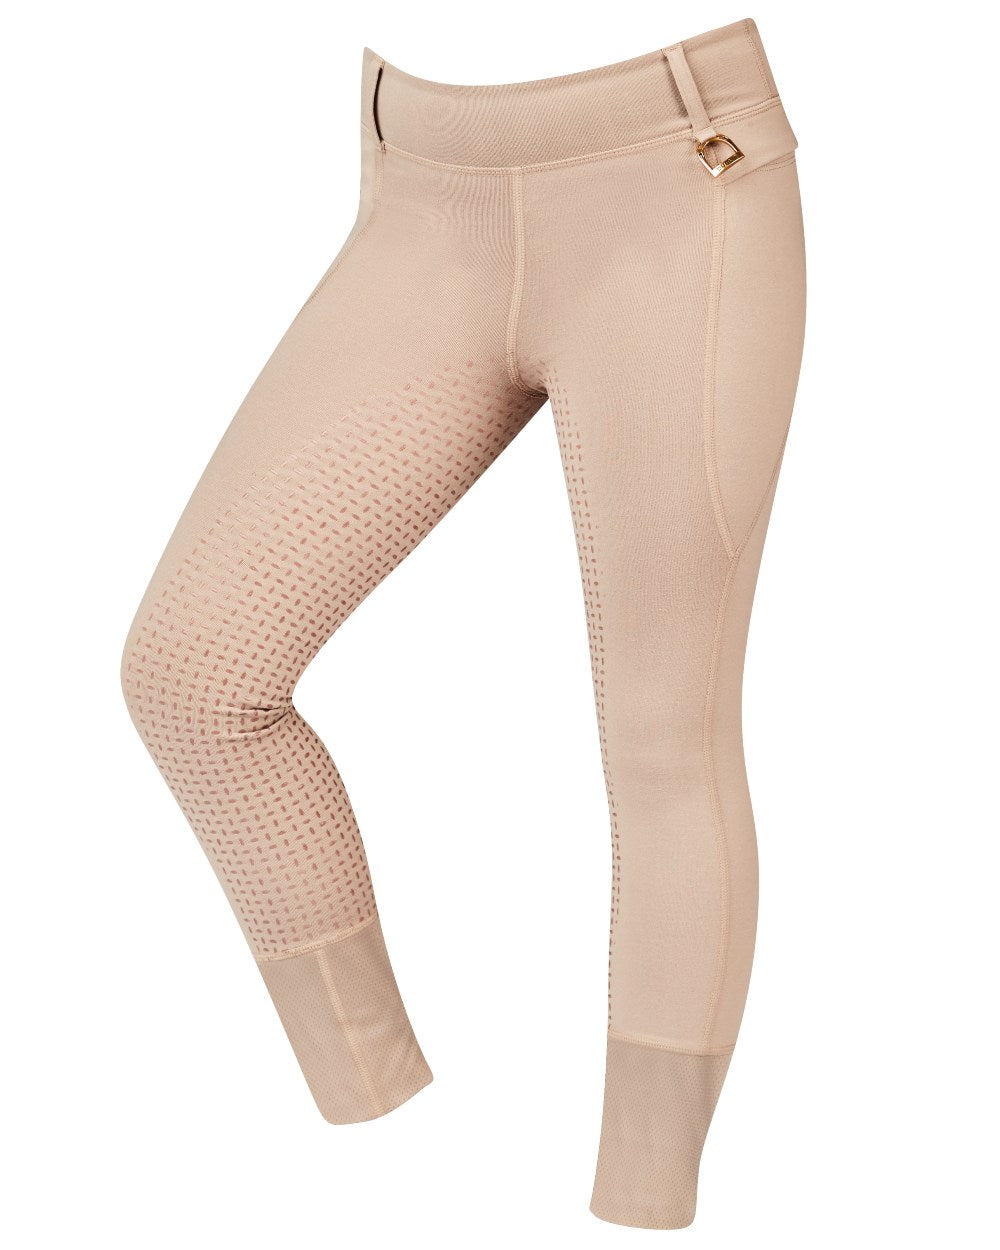 Beige Coloured Dublin Childrens Cool It Everyday Riding Tights On A White Background 